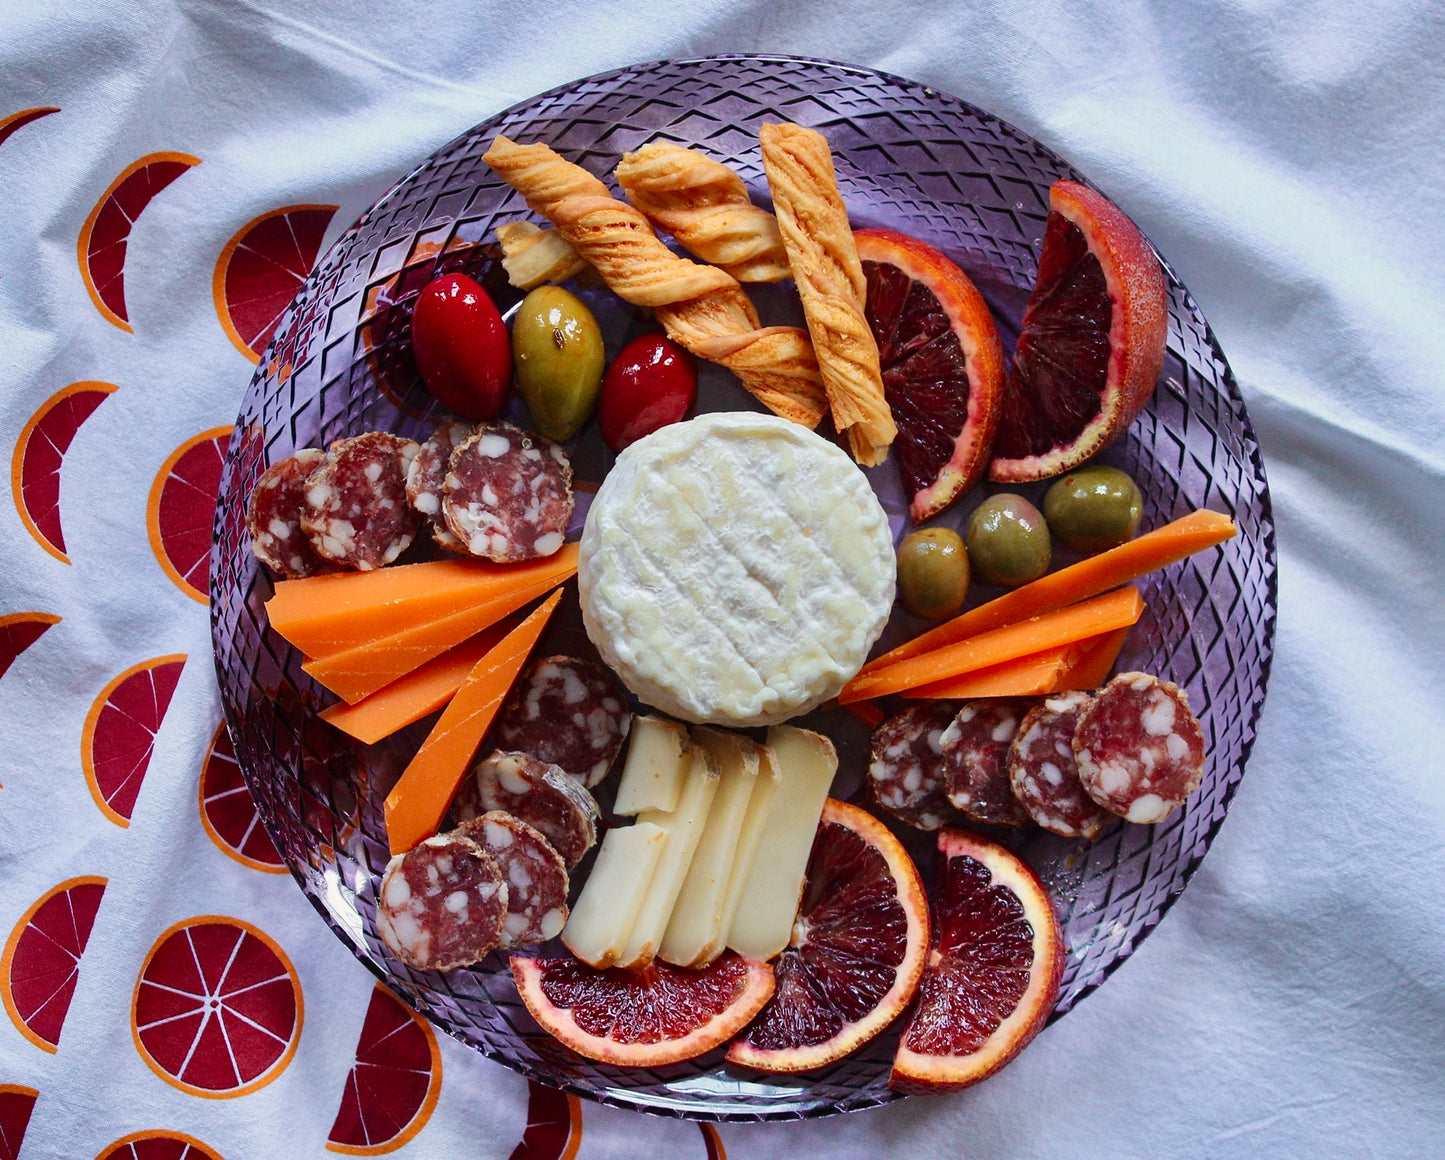 Tea towel with oranges design and charcuterie plate